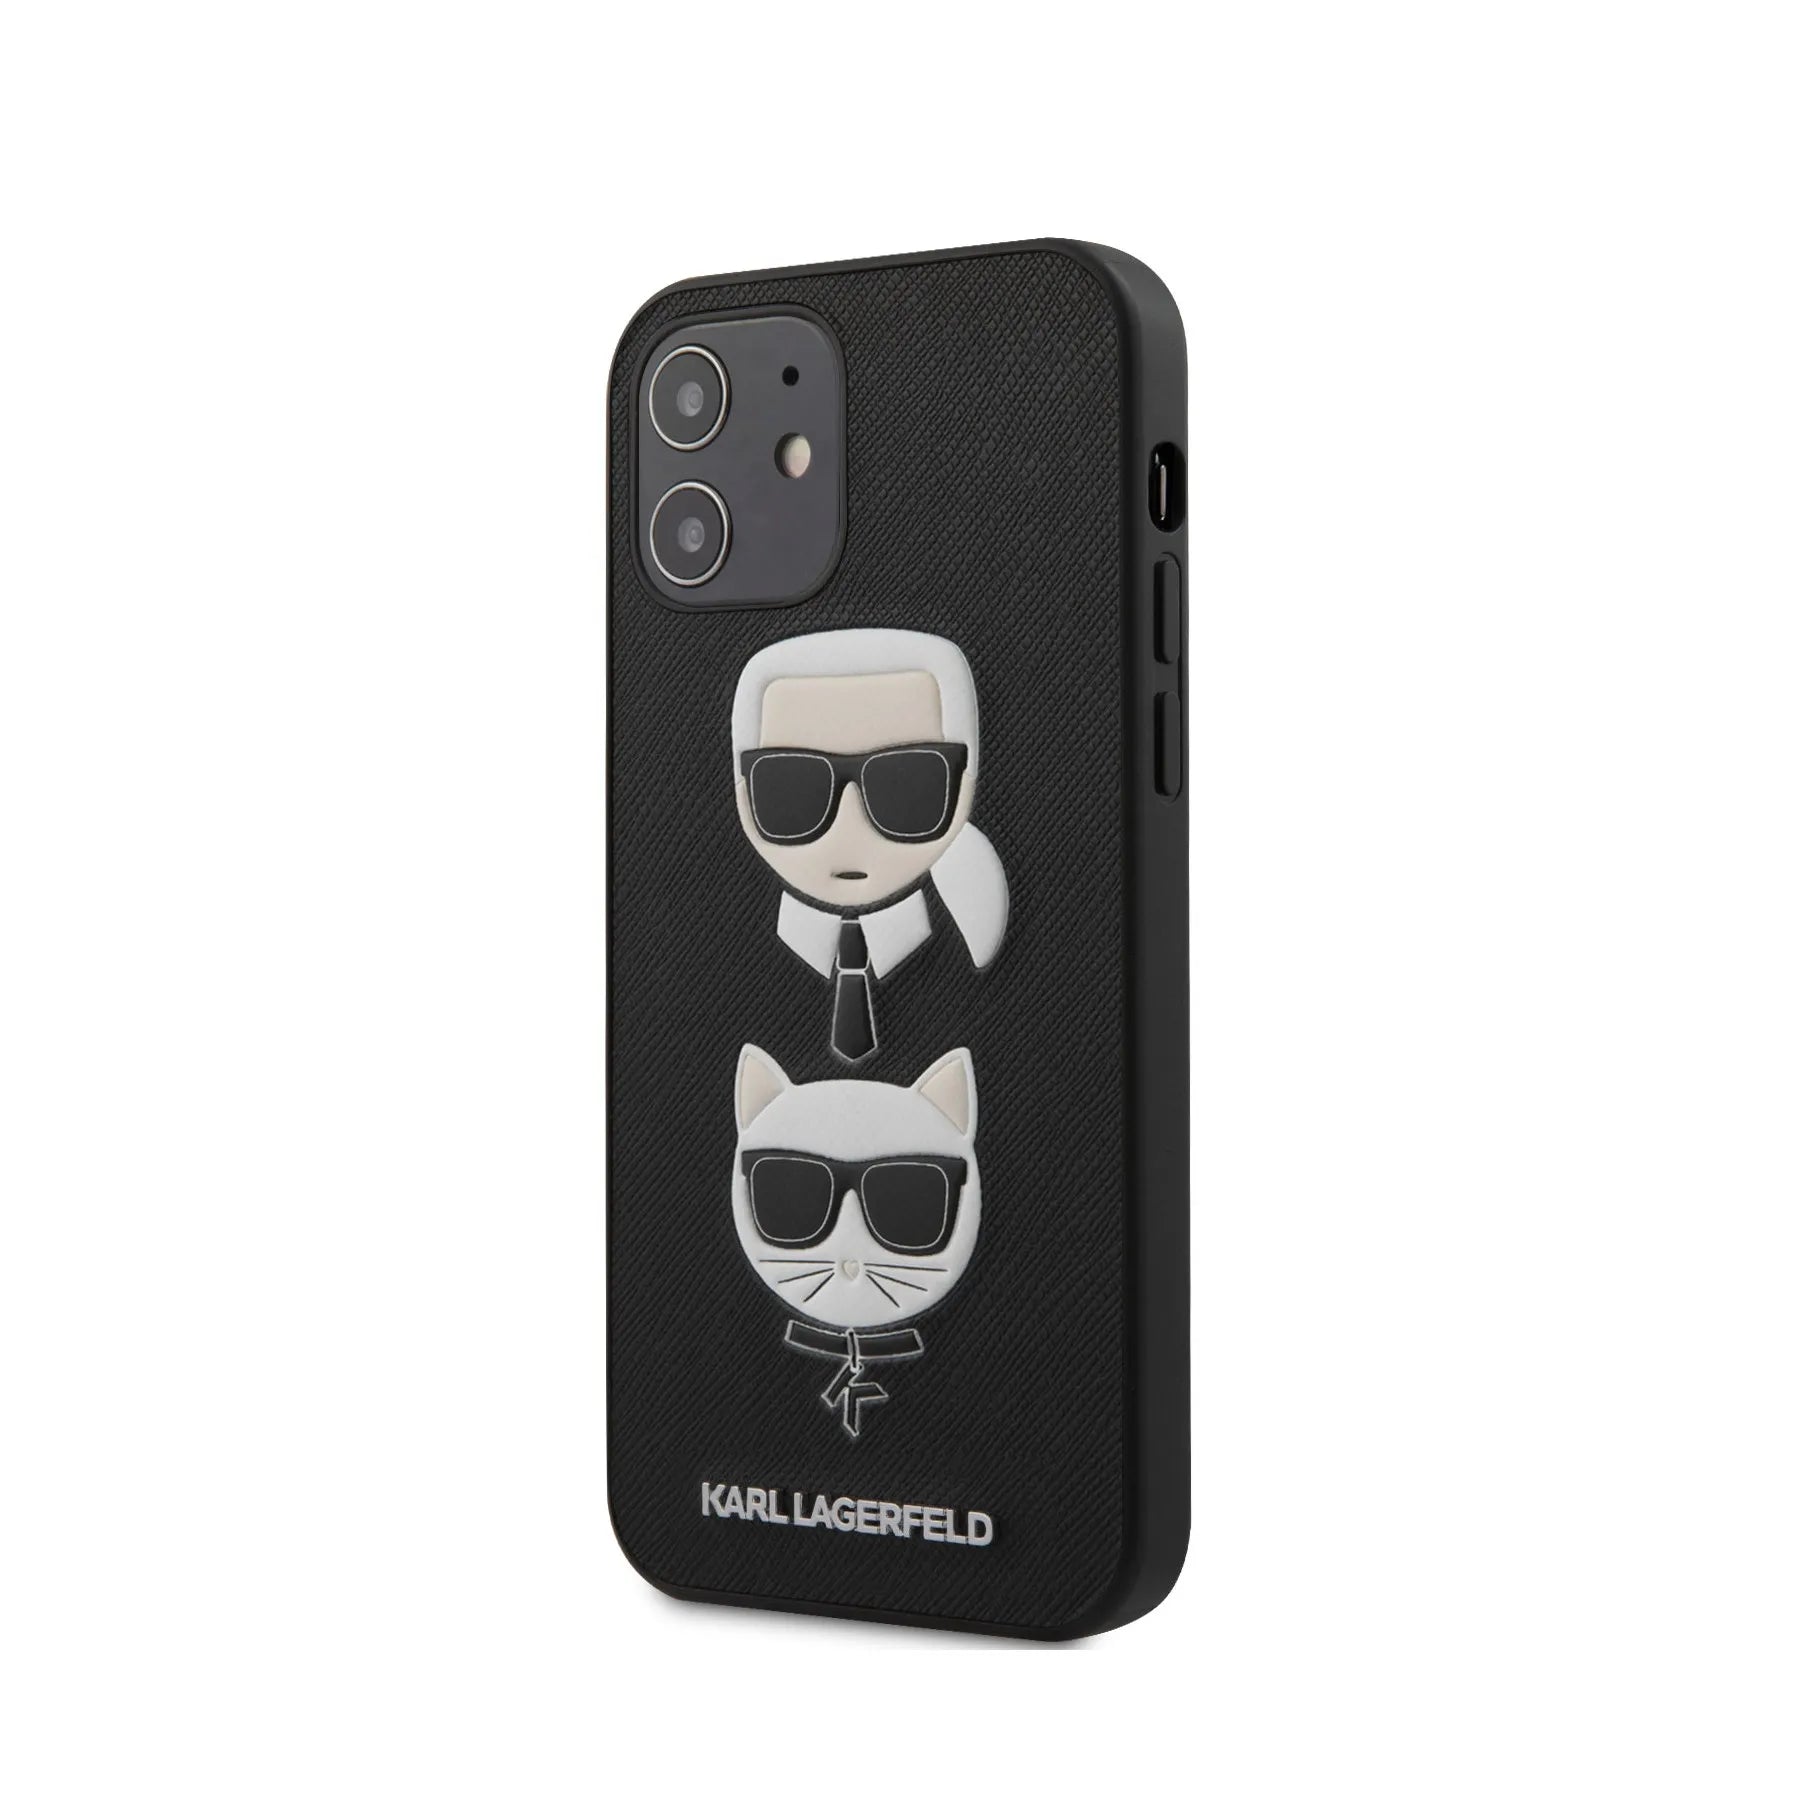 Coque Karl Lagerfeld pour iPhone 12 - My Store